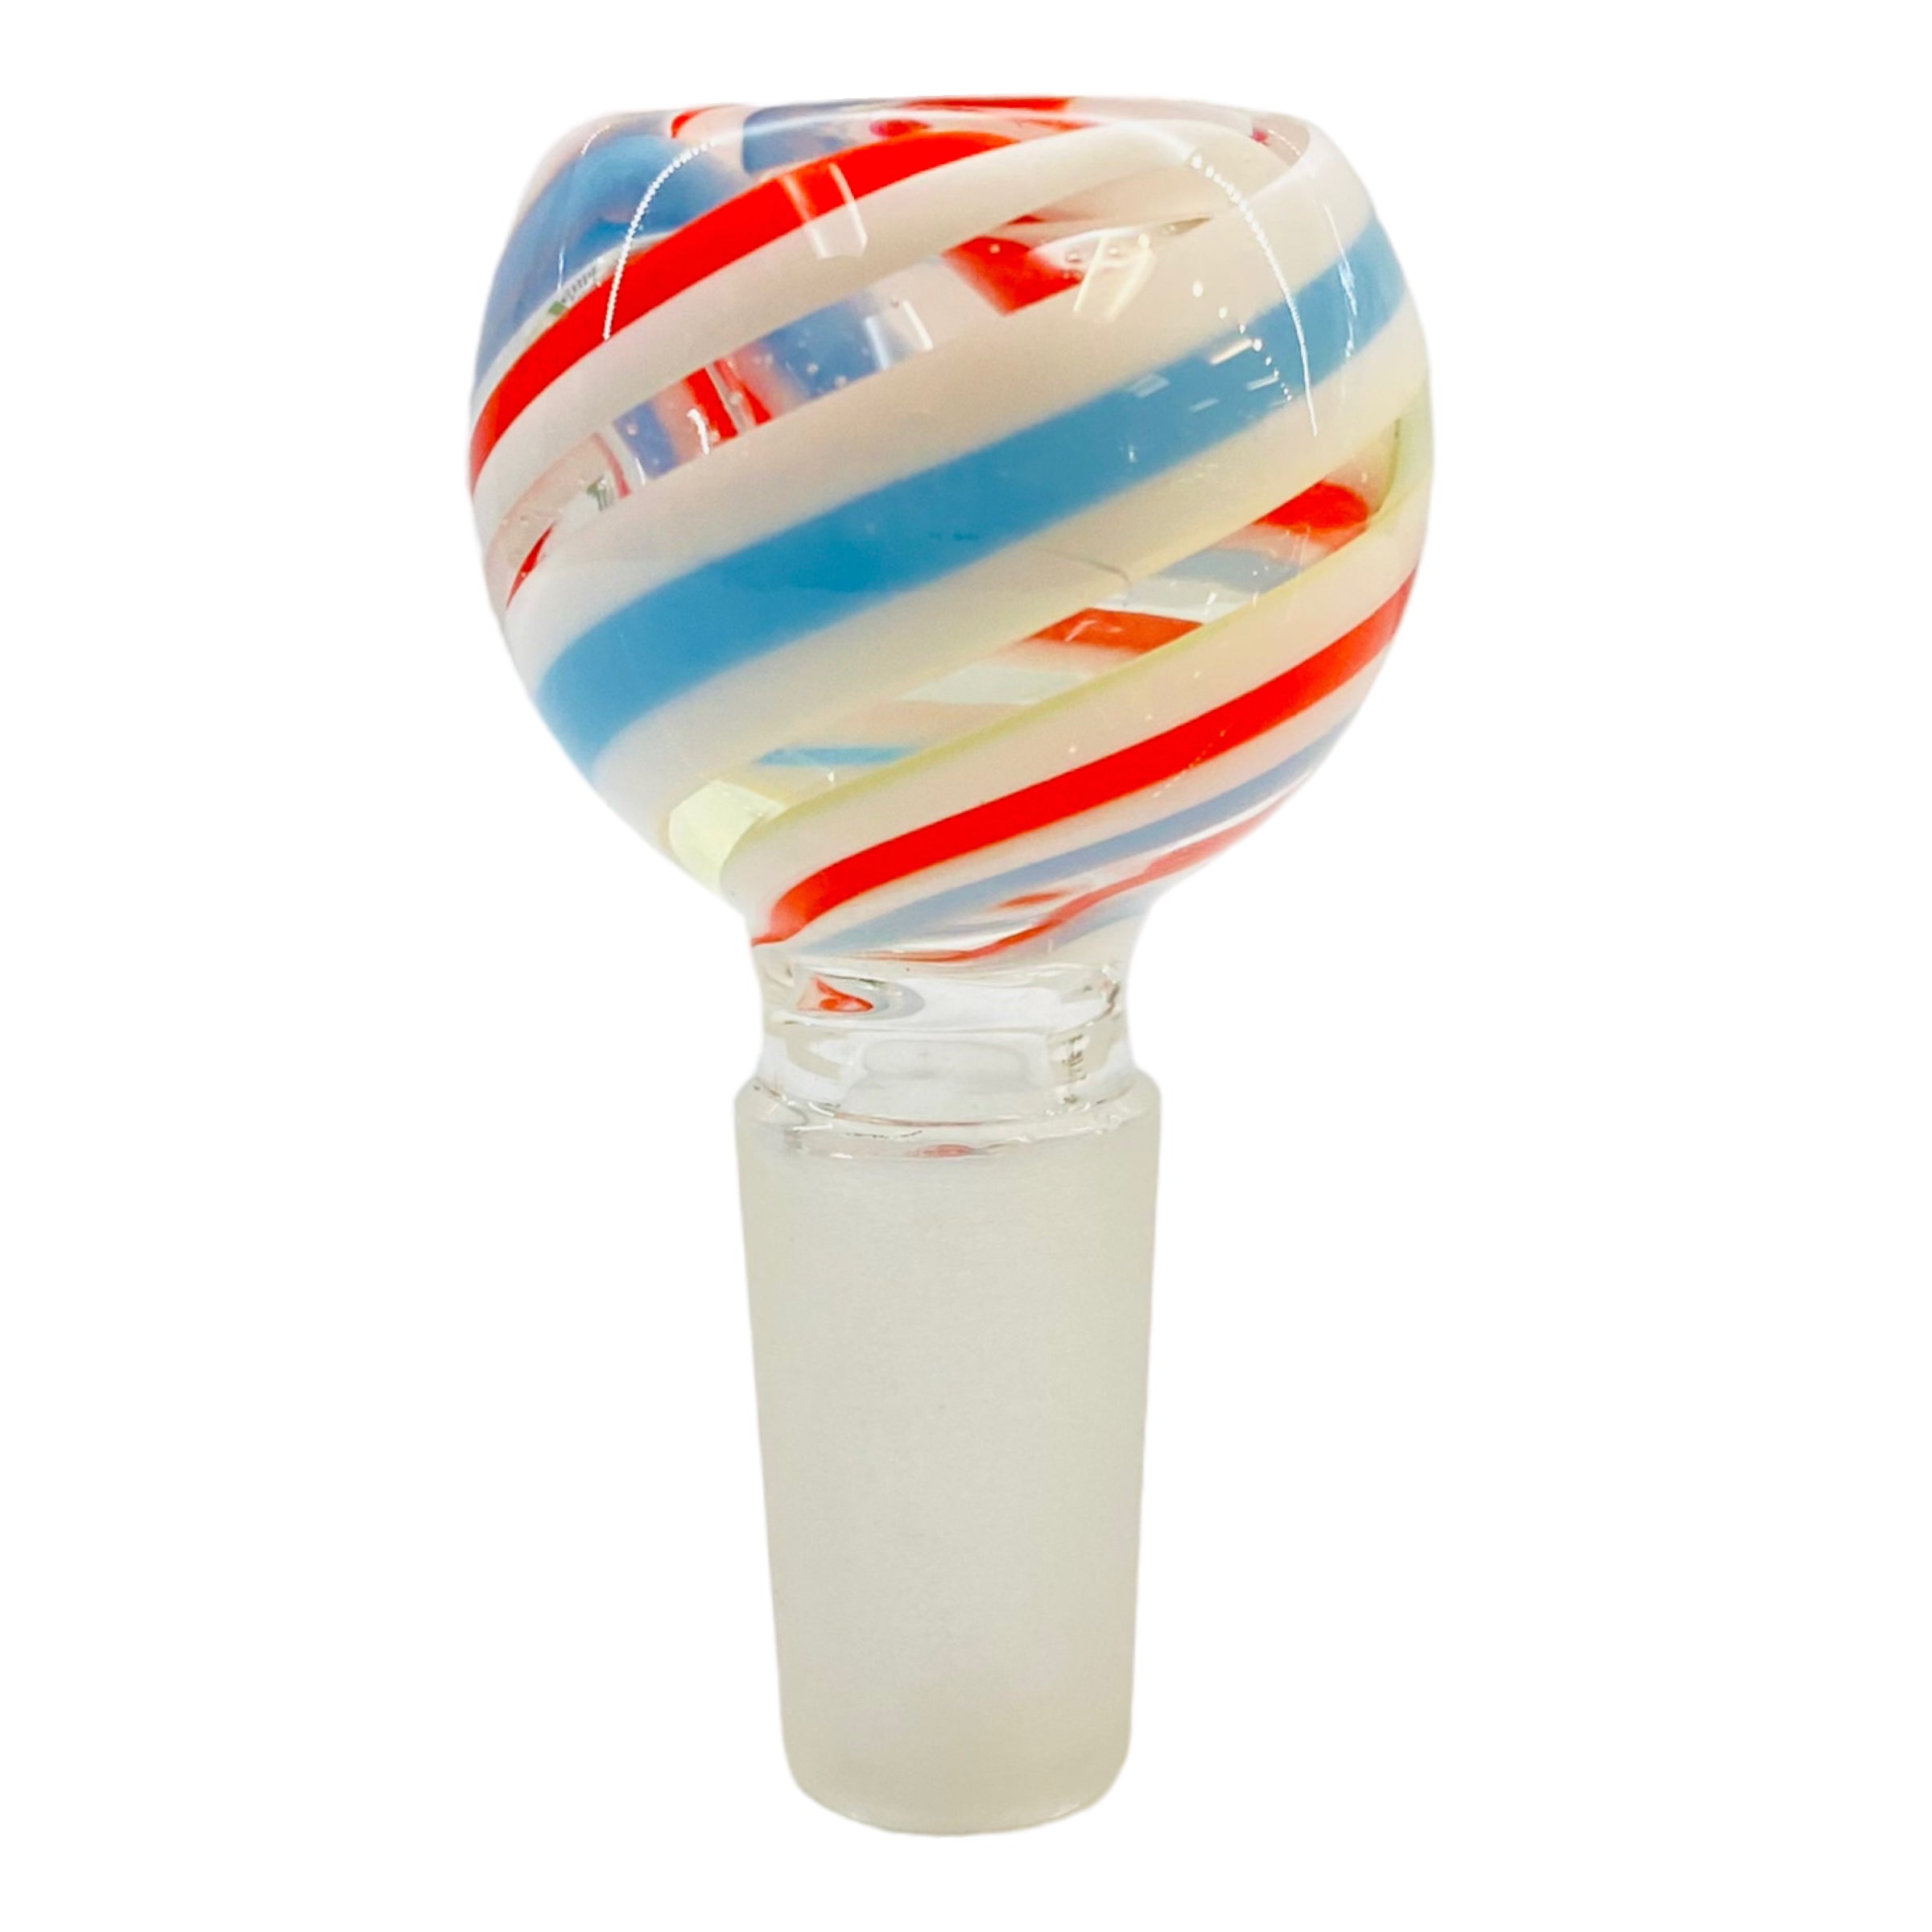 14mm Flower Bowl - Multi Color Bubble Twirl - Red, White, And Blue